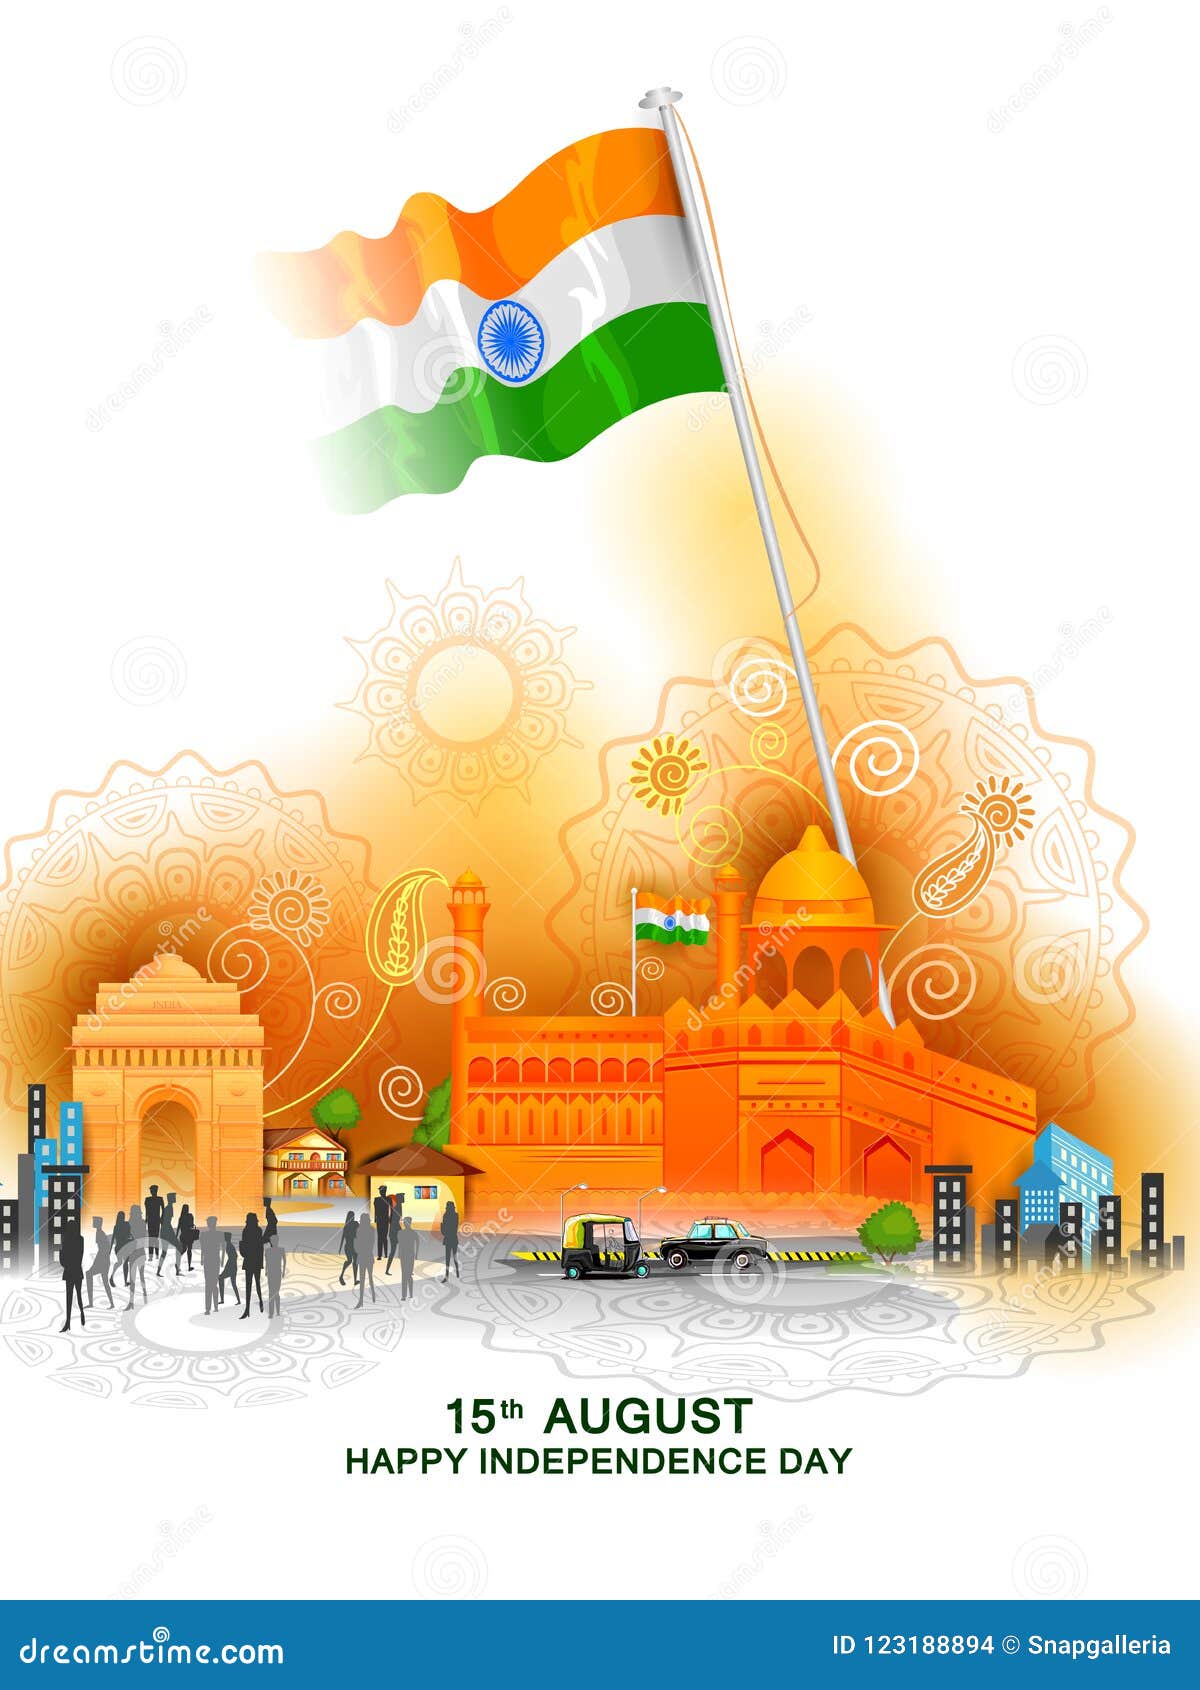 India Independence Day Celebration On 15 August With Lal Kila Bacground ...